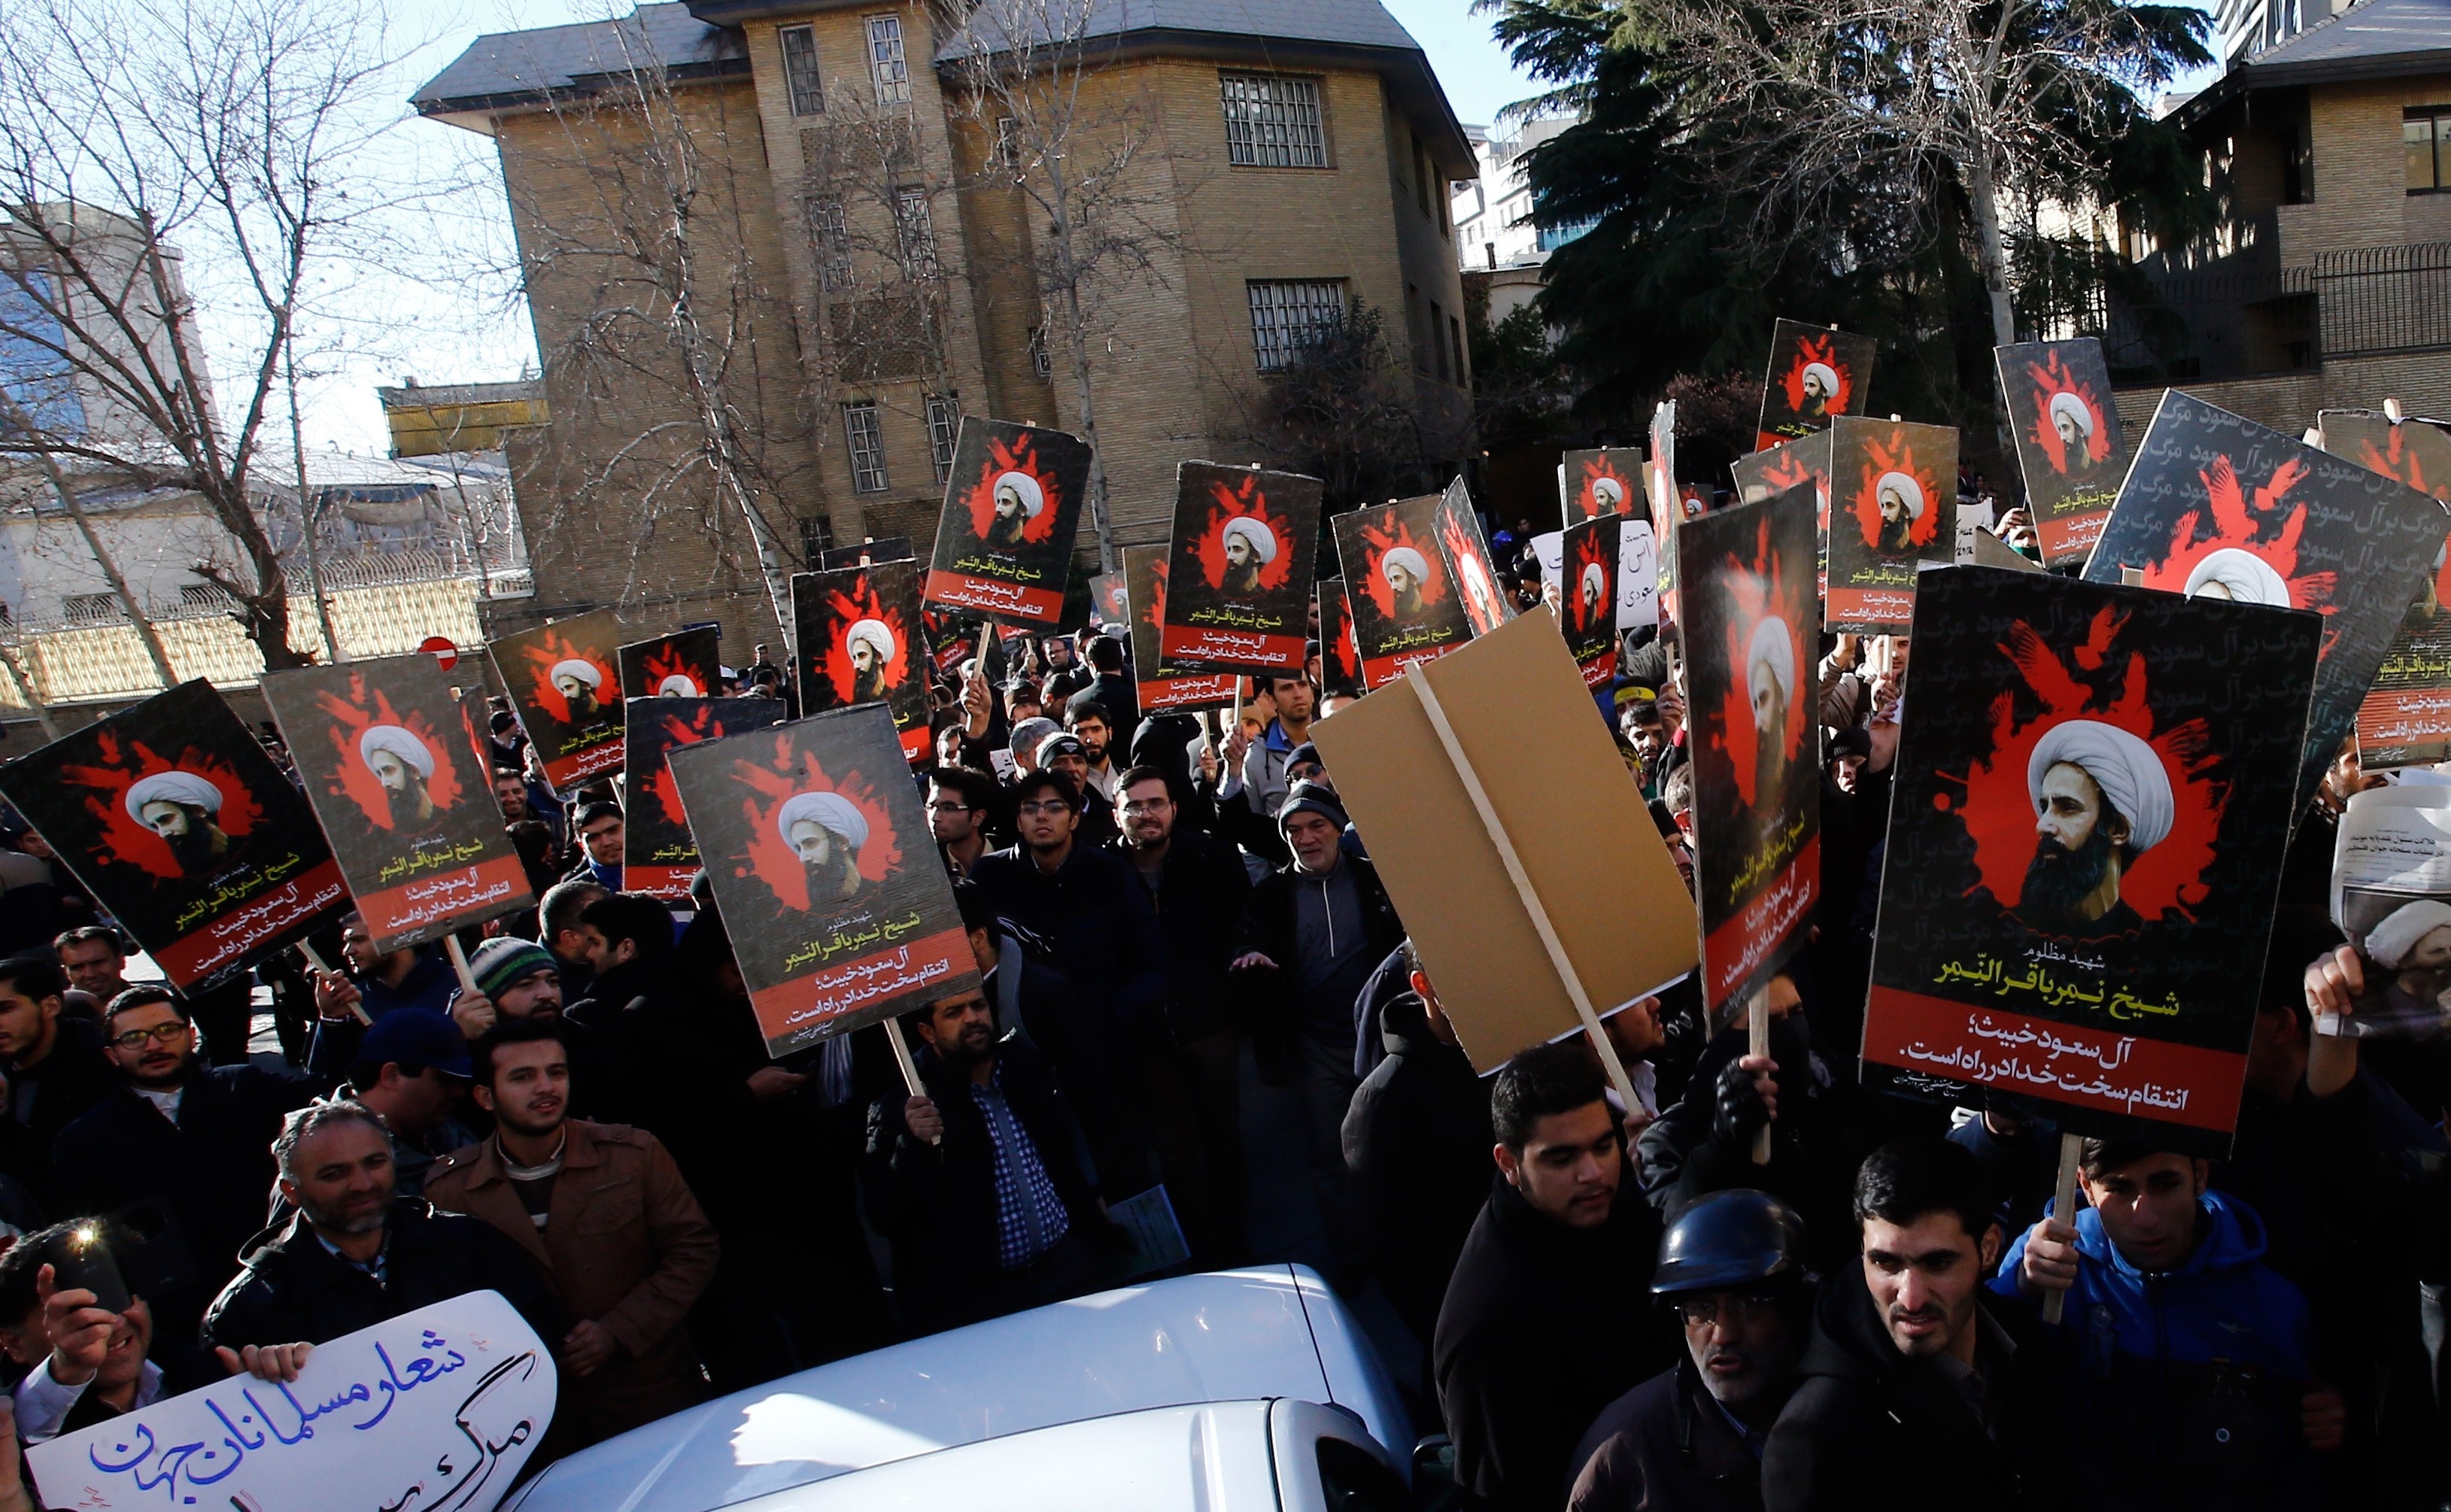 Demonstrators hold posters of Nimr Baqir al-Nimr and shout slogans during a protest rally outside the embassy of Saudi Arabia against the execution of prominent Saudi Shia cleric Nimr Baqir al-Nimr by Saudi authorities, in Tehran, Iran on Jan. 3 2016. (Anadolu Agency—Getty Images)